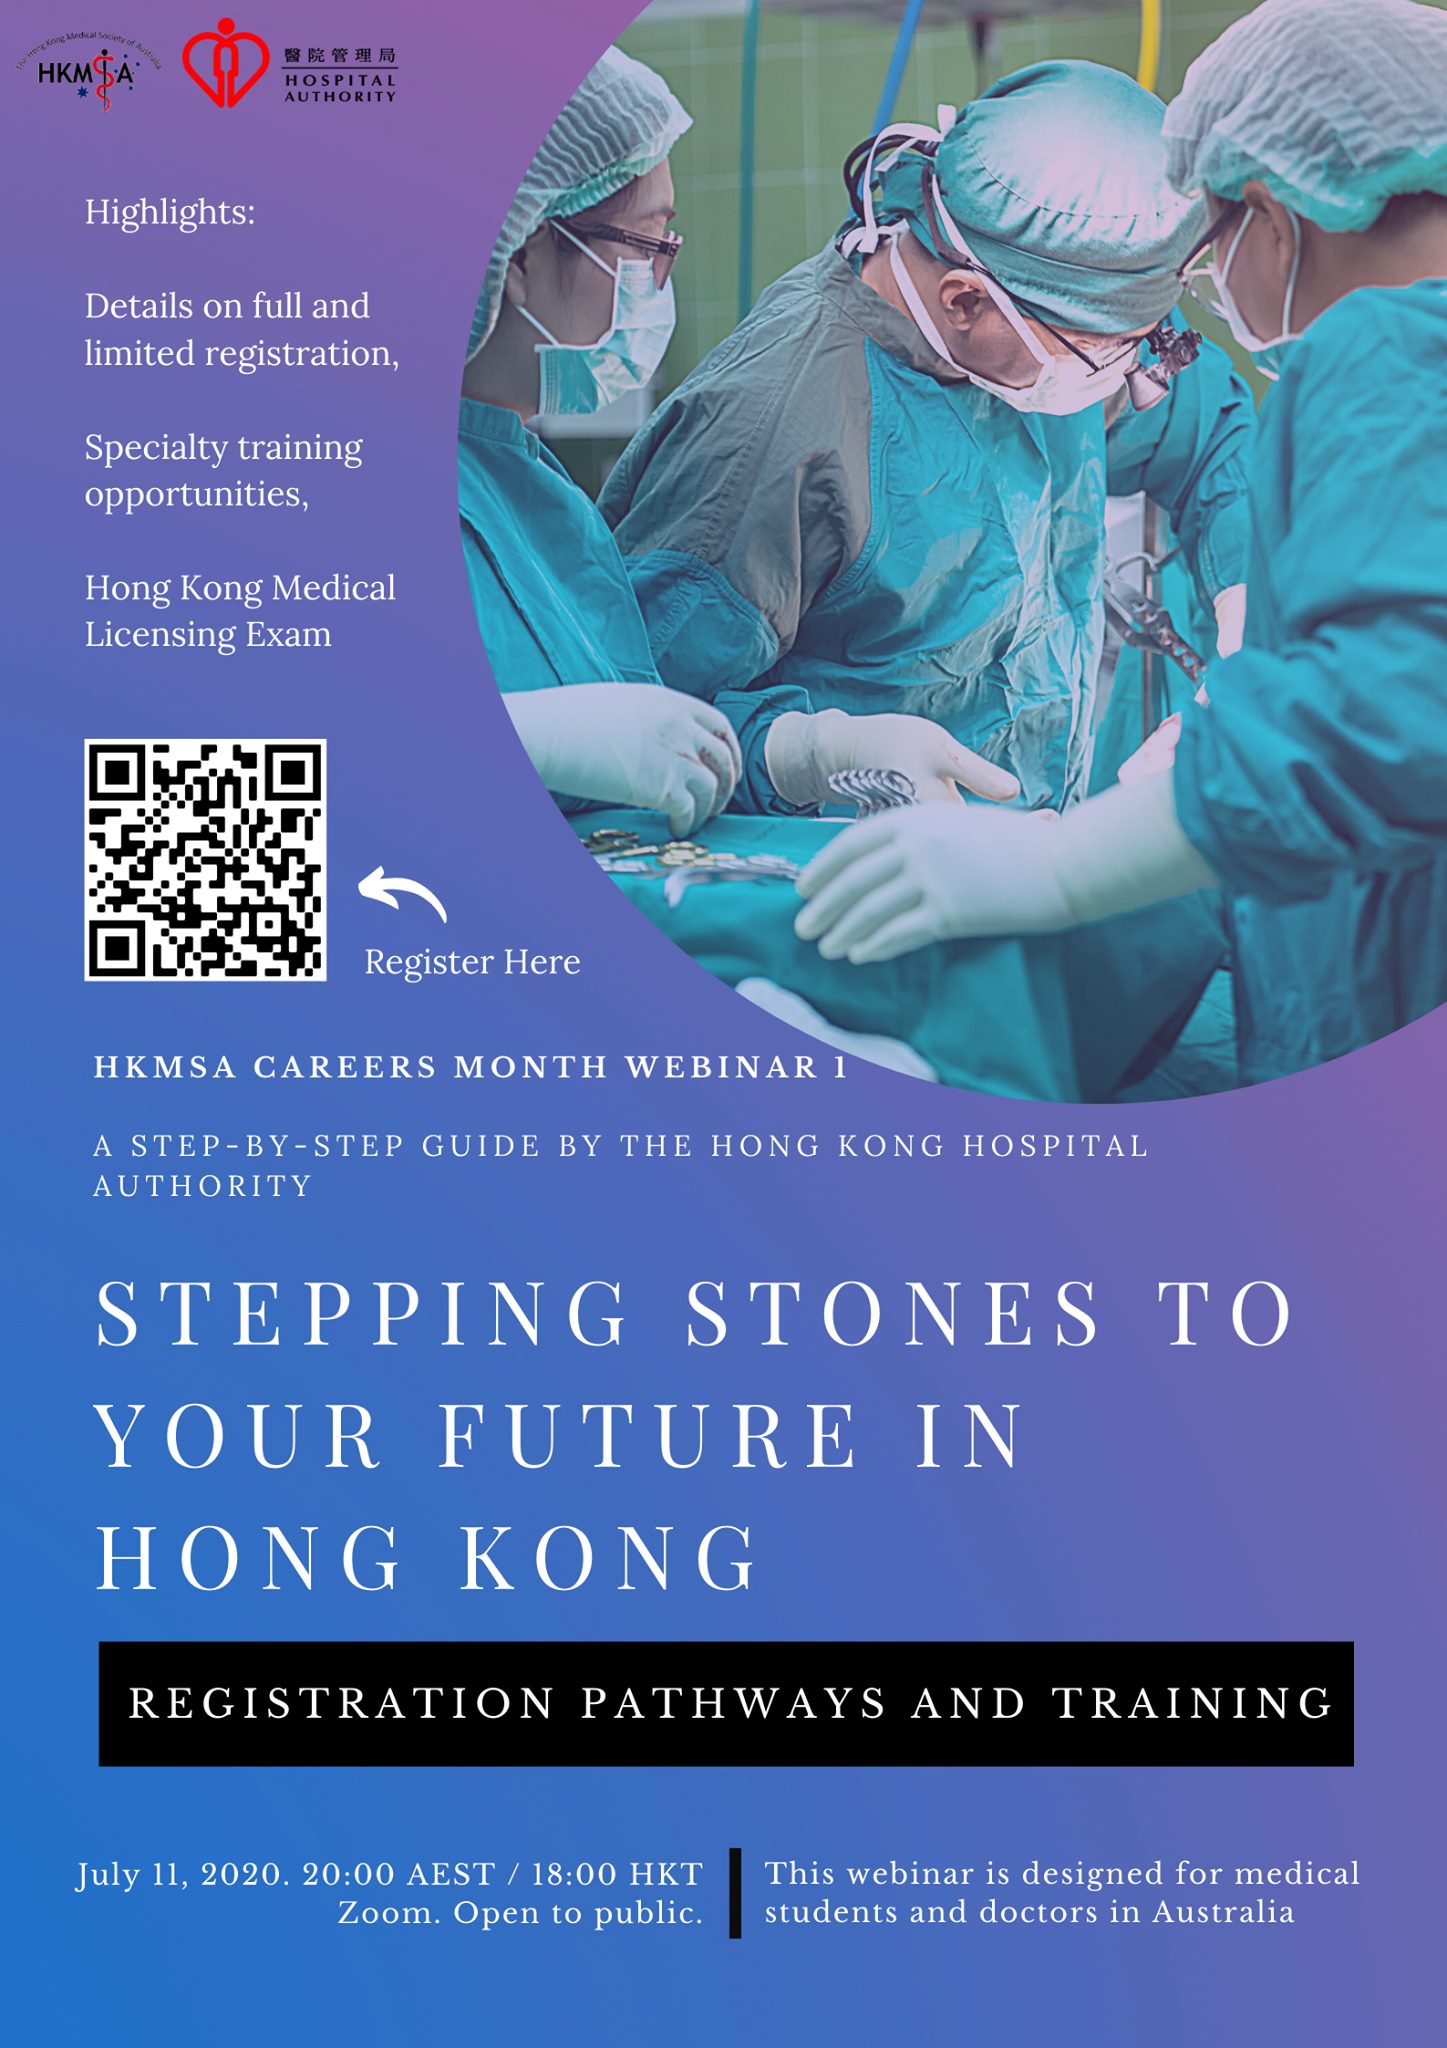 Stepping Stones to Your Future in Hong Kong - Registration Pathways and Training – co-organized with The Hong Kong Medical Society of Australia (11 July 2020) (Web Conference)